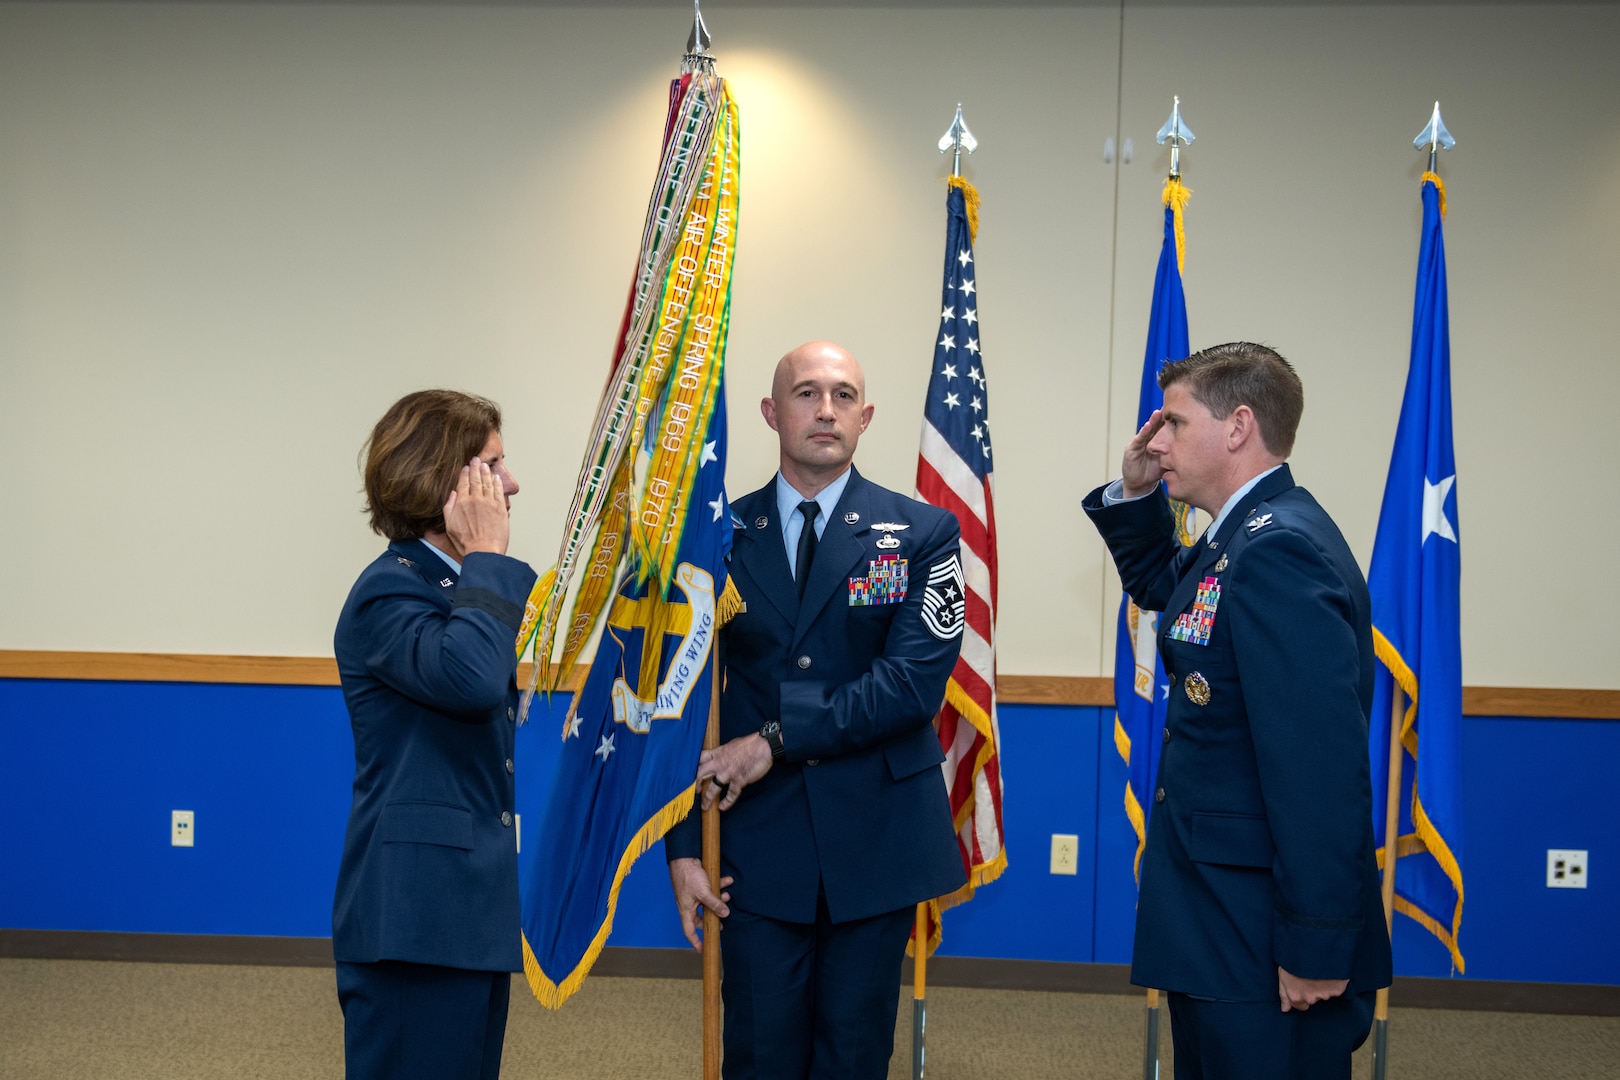 U.S. Air Force Col. Rockie Wilson (right), 37th Training Wing commander, salutes Maj. Gen. Andrea Tullos (left), Second Air Force commander, Keesler Air Force Base, Miss., after accepting command during the change of command ceremony July 15, 2020